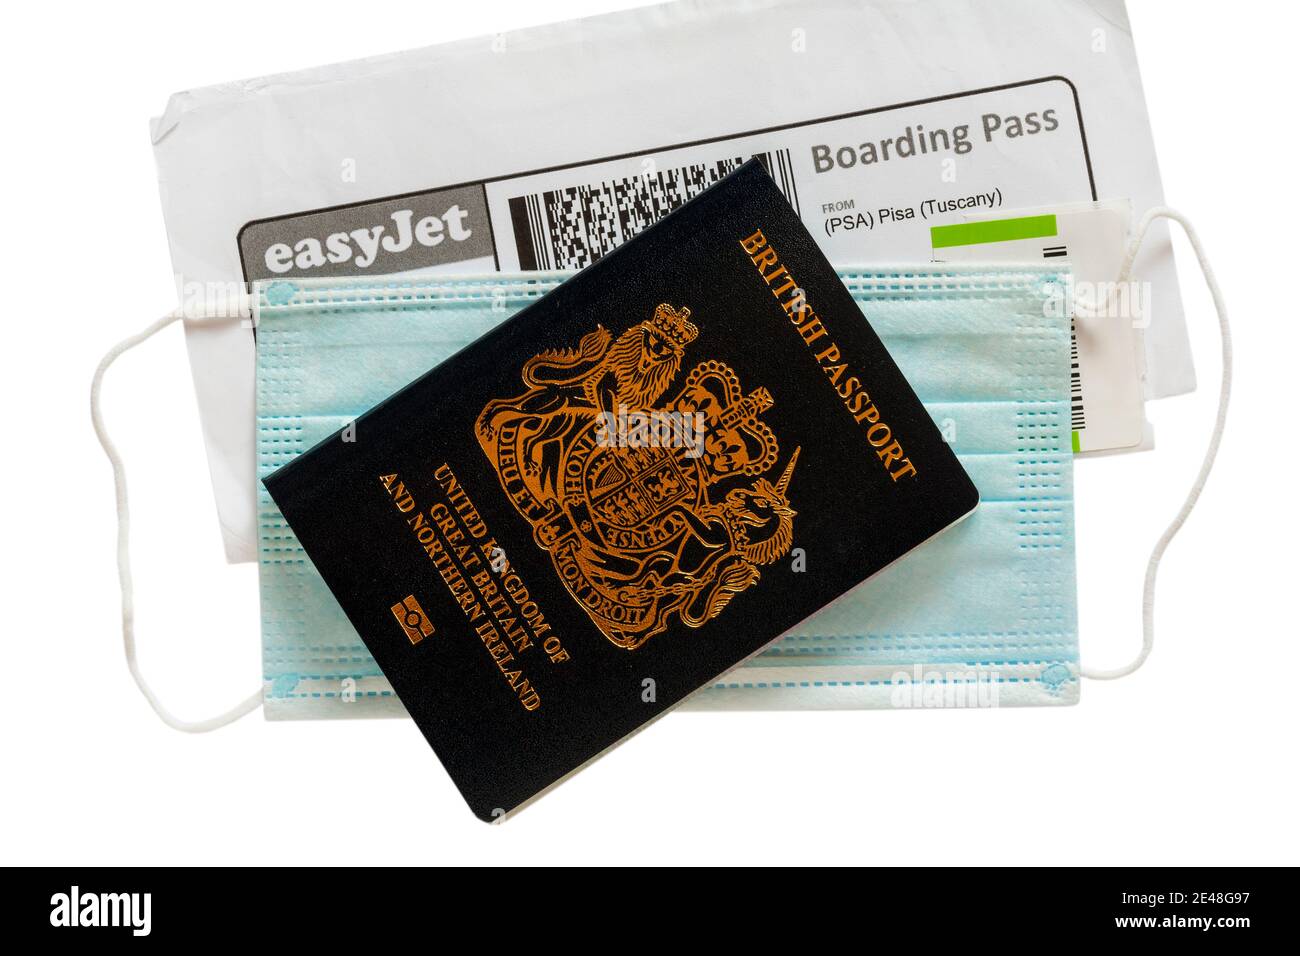 EasyJet boarding pass for flight from Pisa Tuscany and face mask with new British passport set on white background Stock Photo